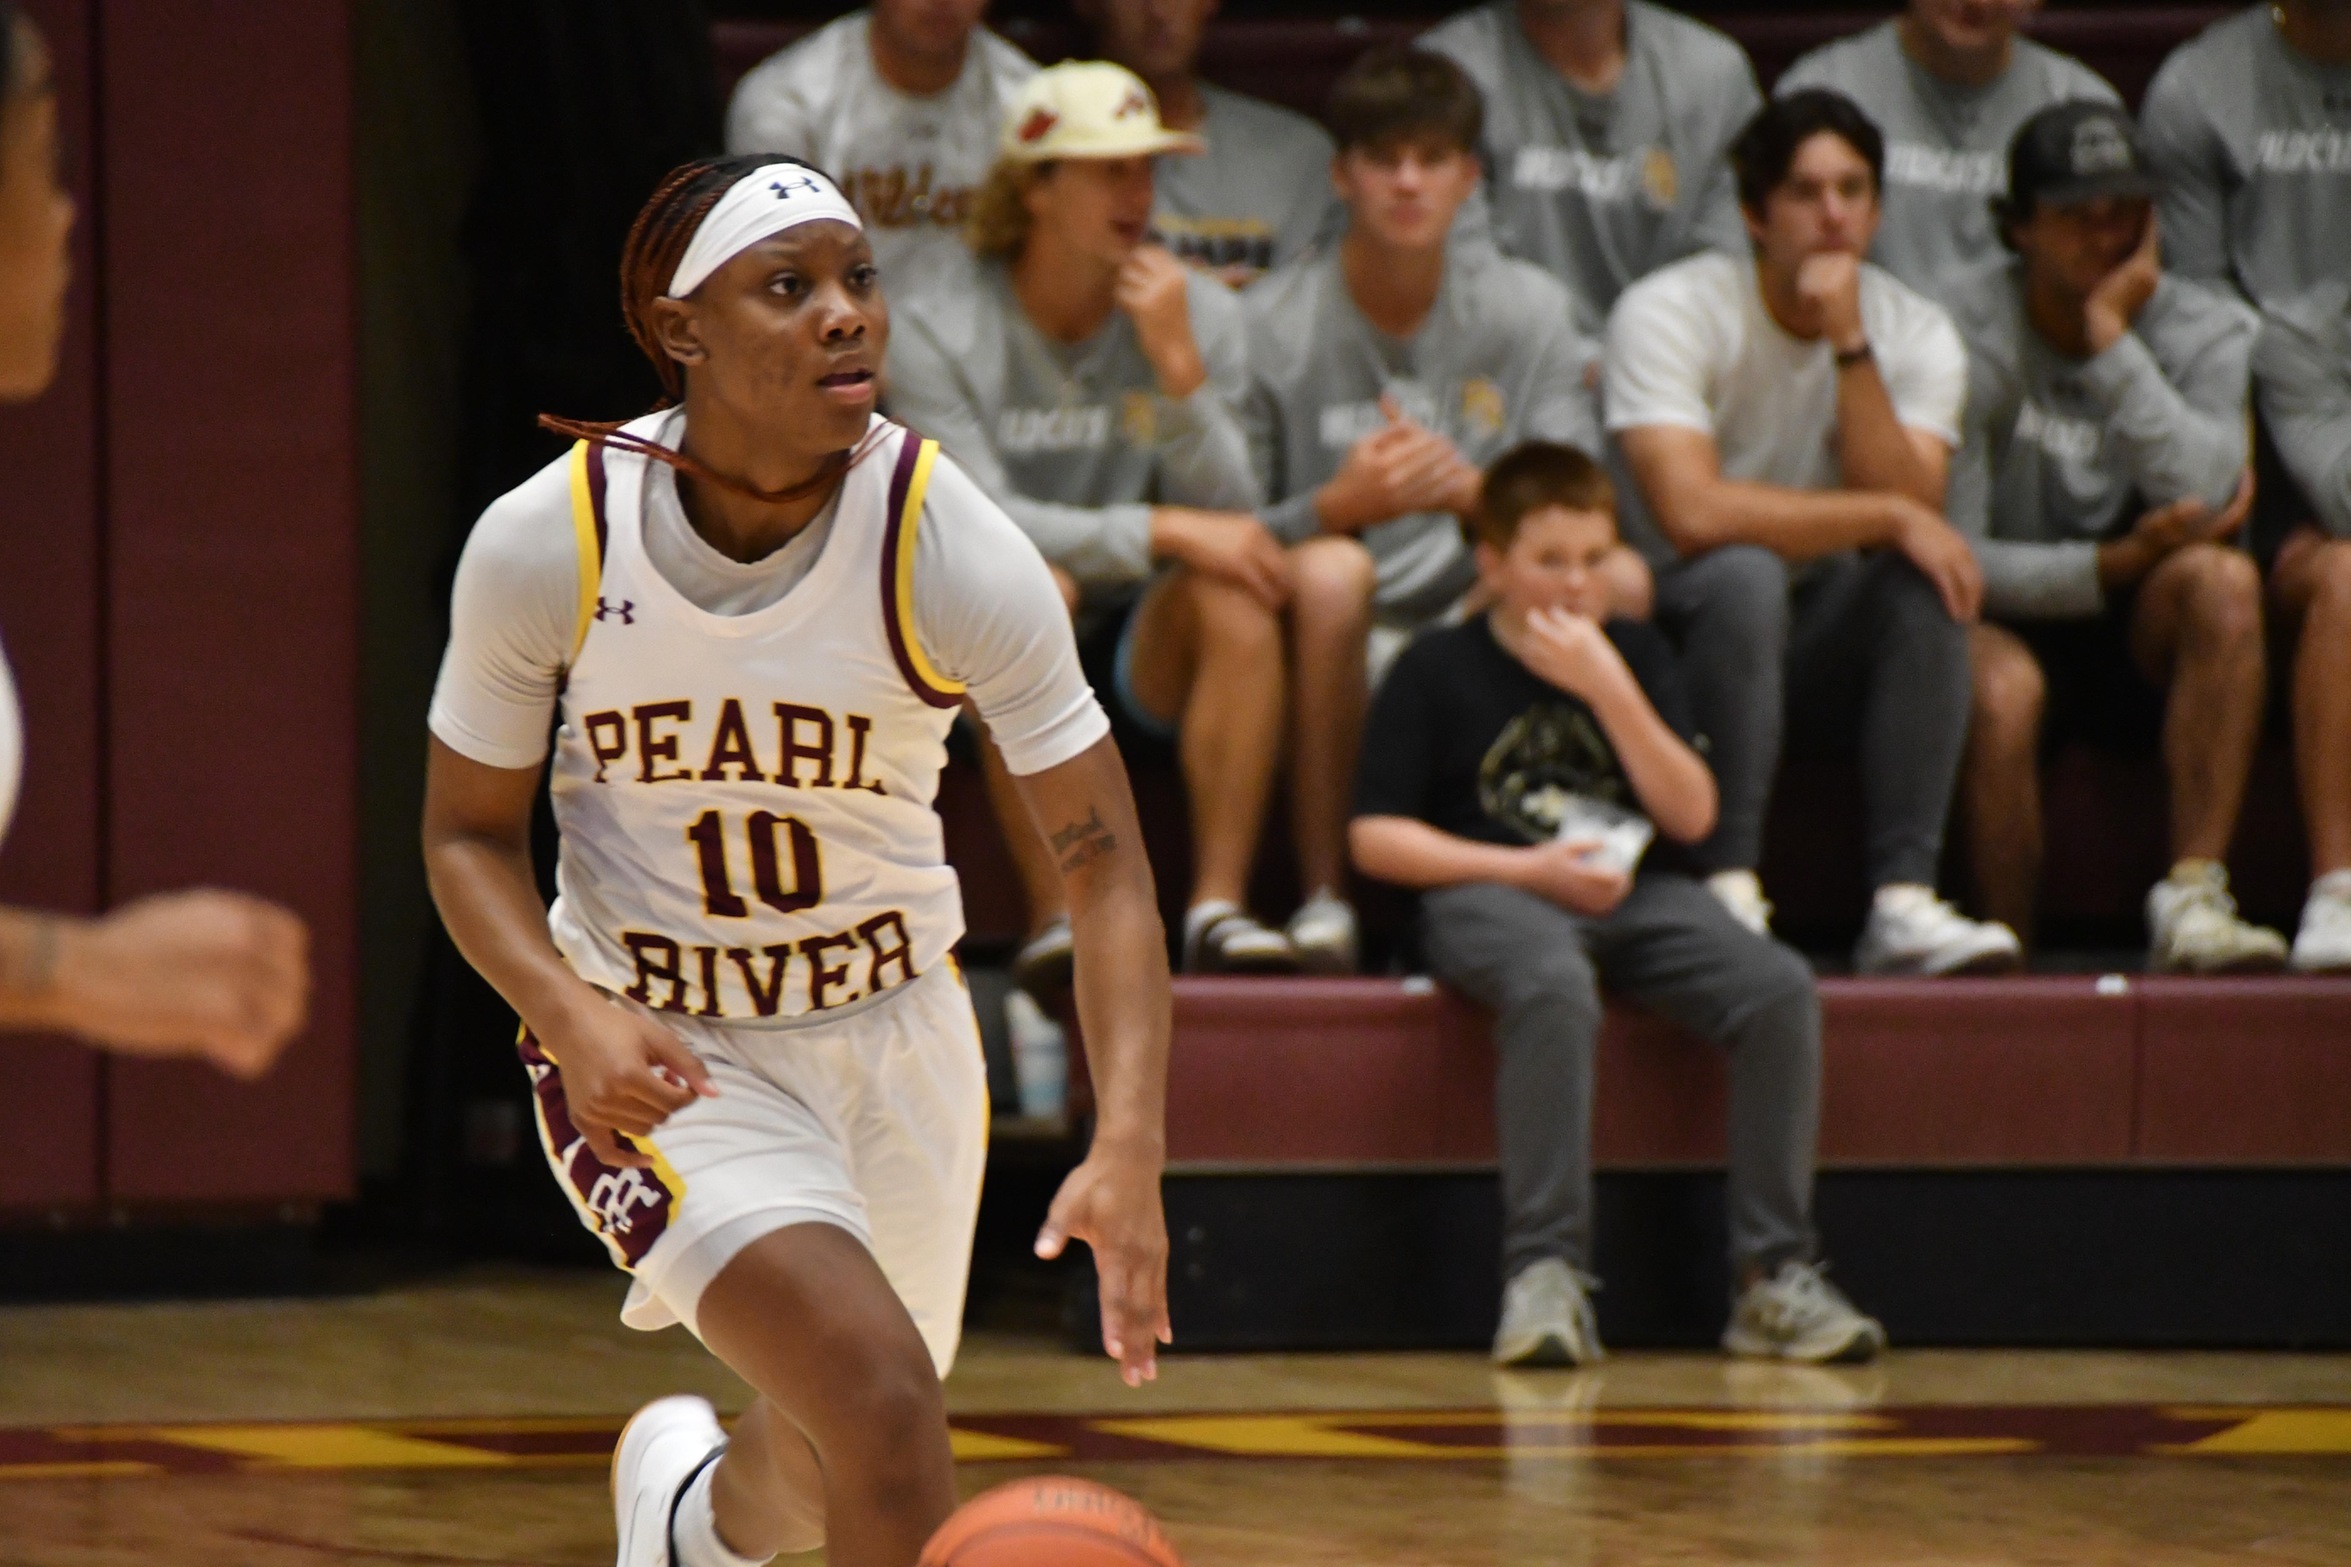 Pearl River advances to Region 23 Semifinals after emphatic win over Southwest